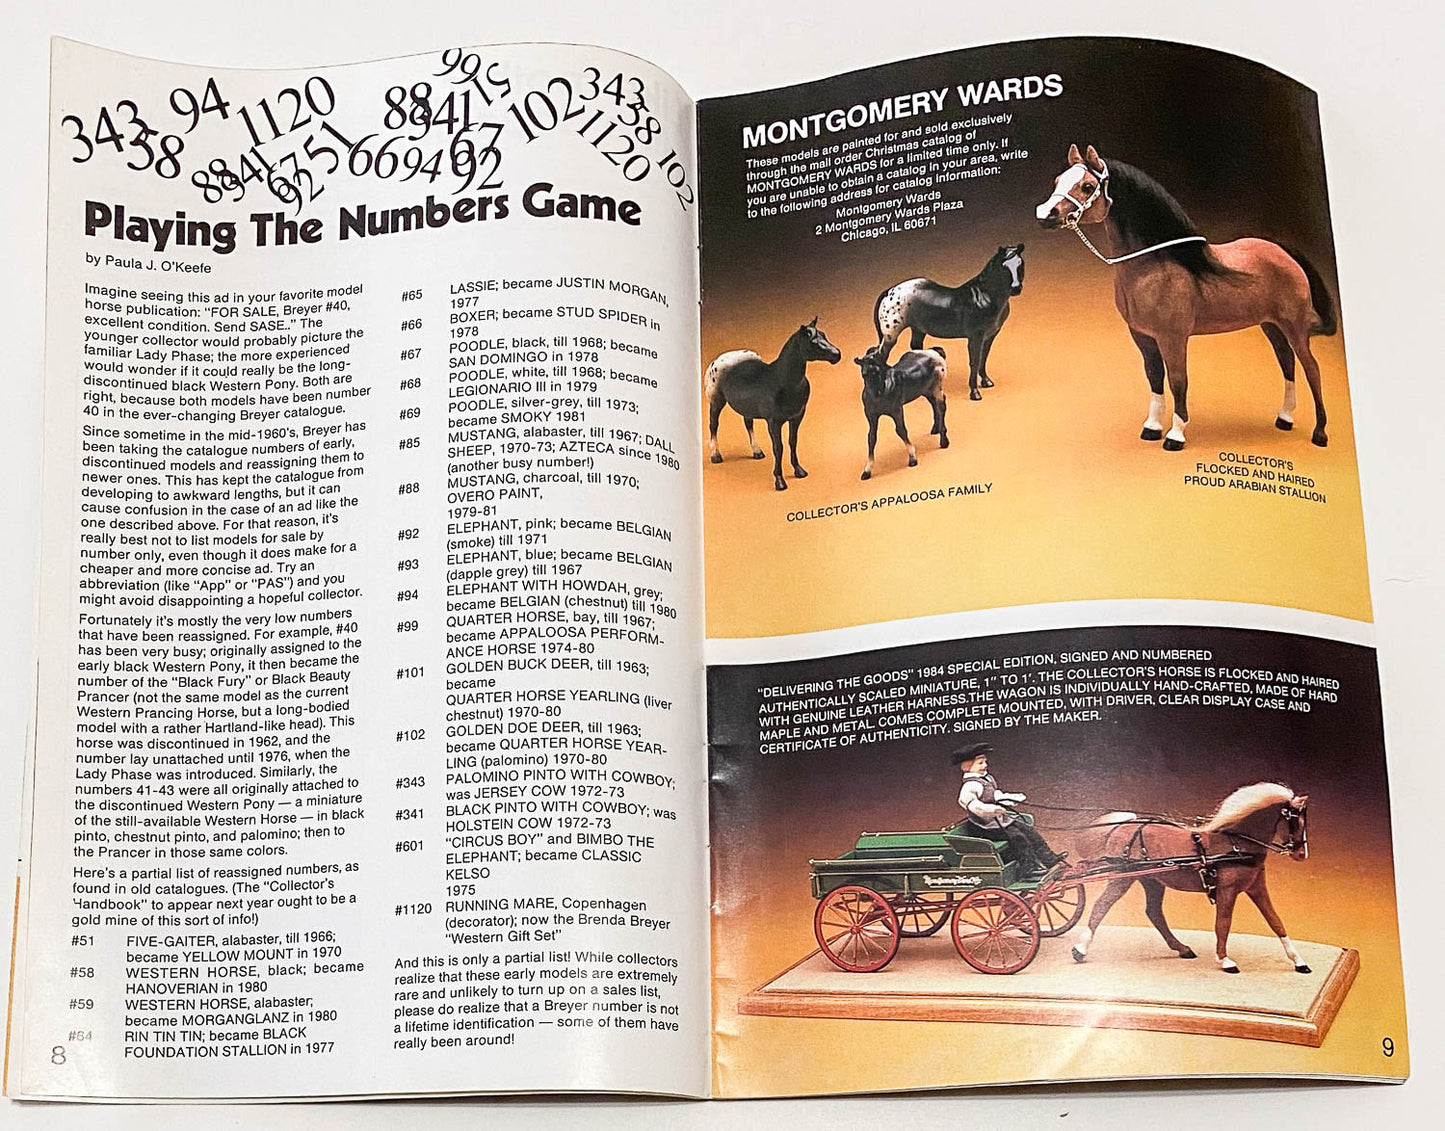 Just About Horses Magazine Vol 11 No. 3, 1984 (Summer 2)